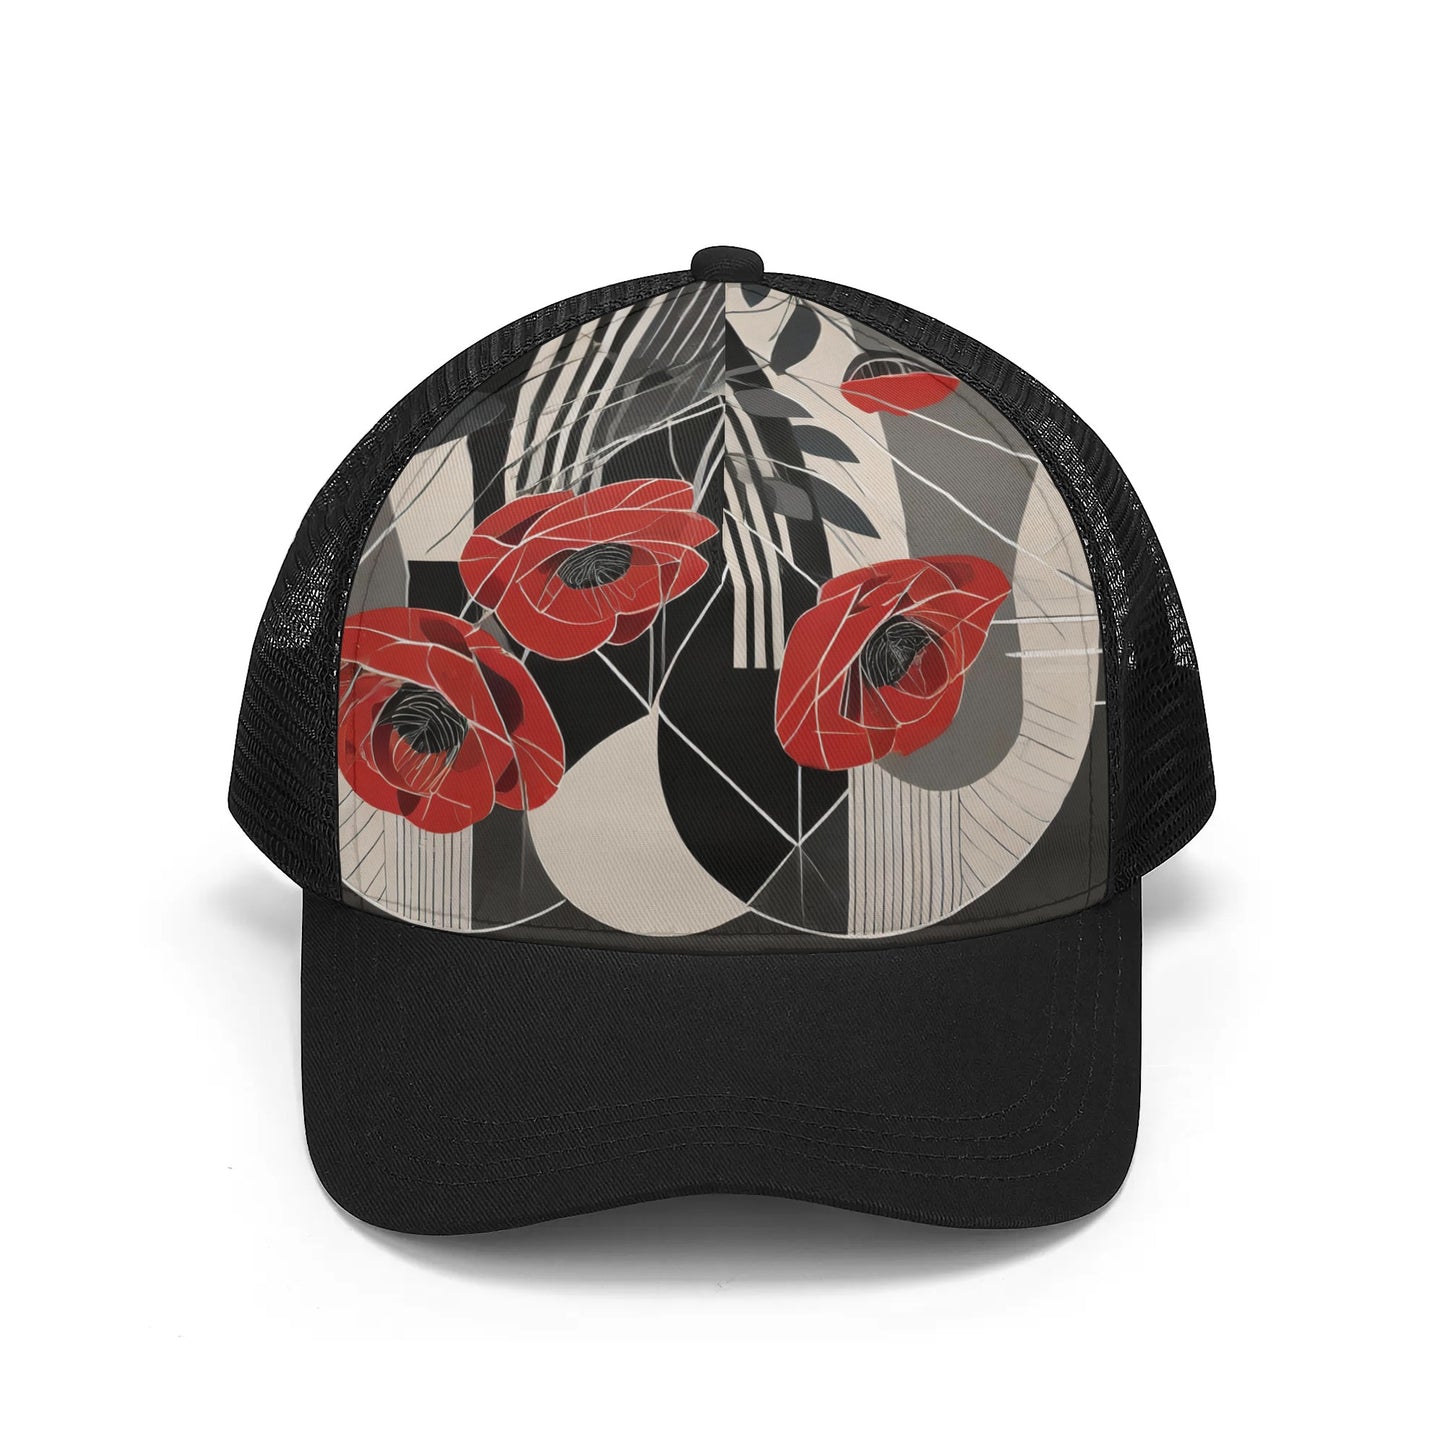 Deco Red Poppies Front Printing Mesh Trucker Hat Art Deco Pretty Summer Hat